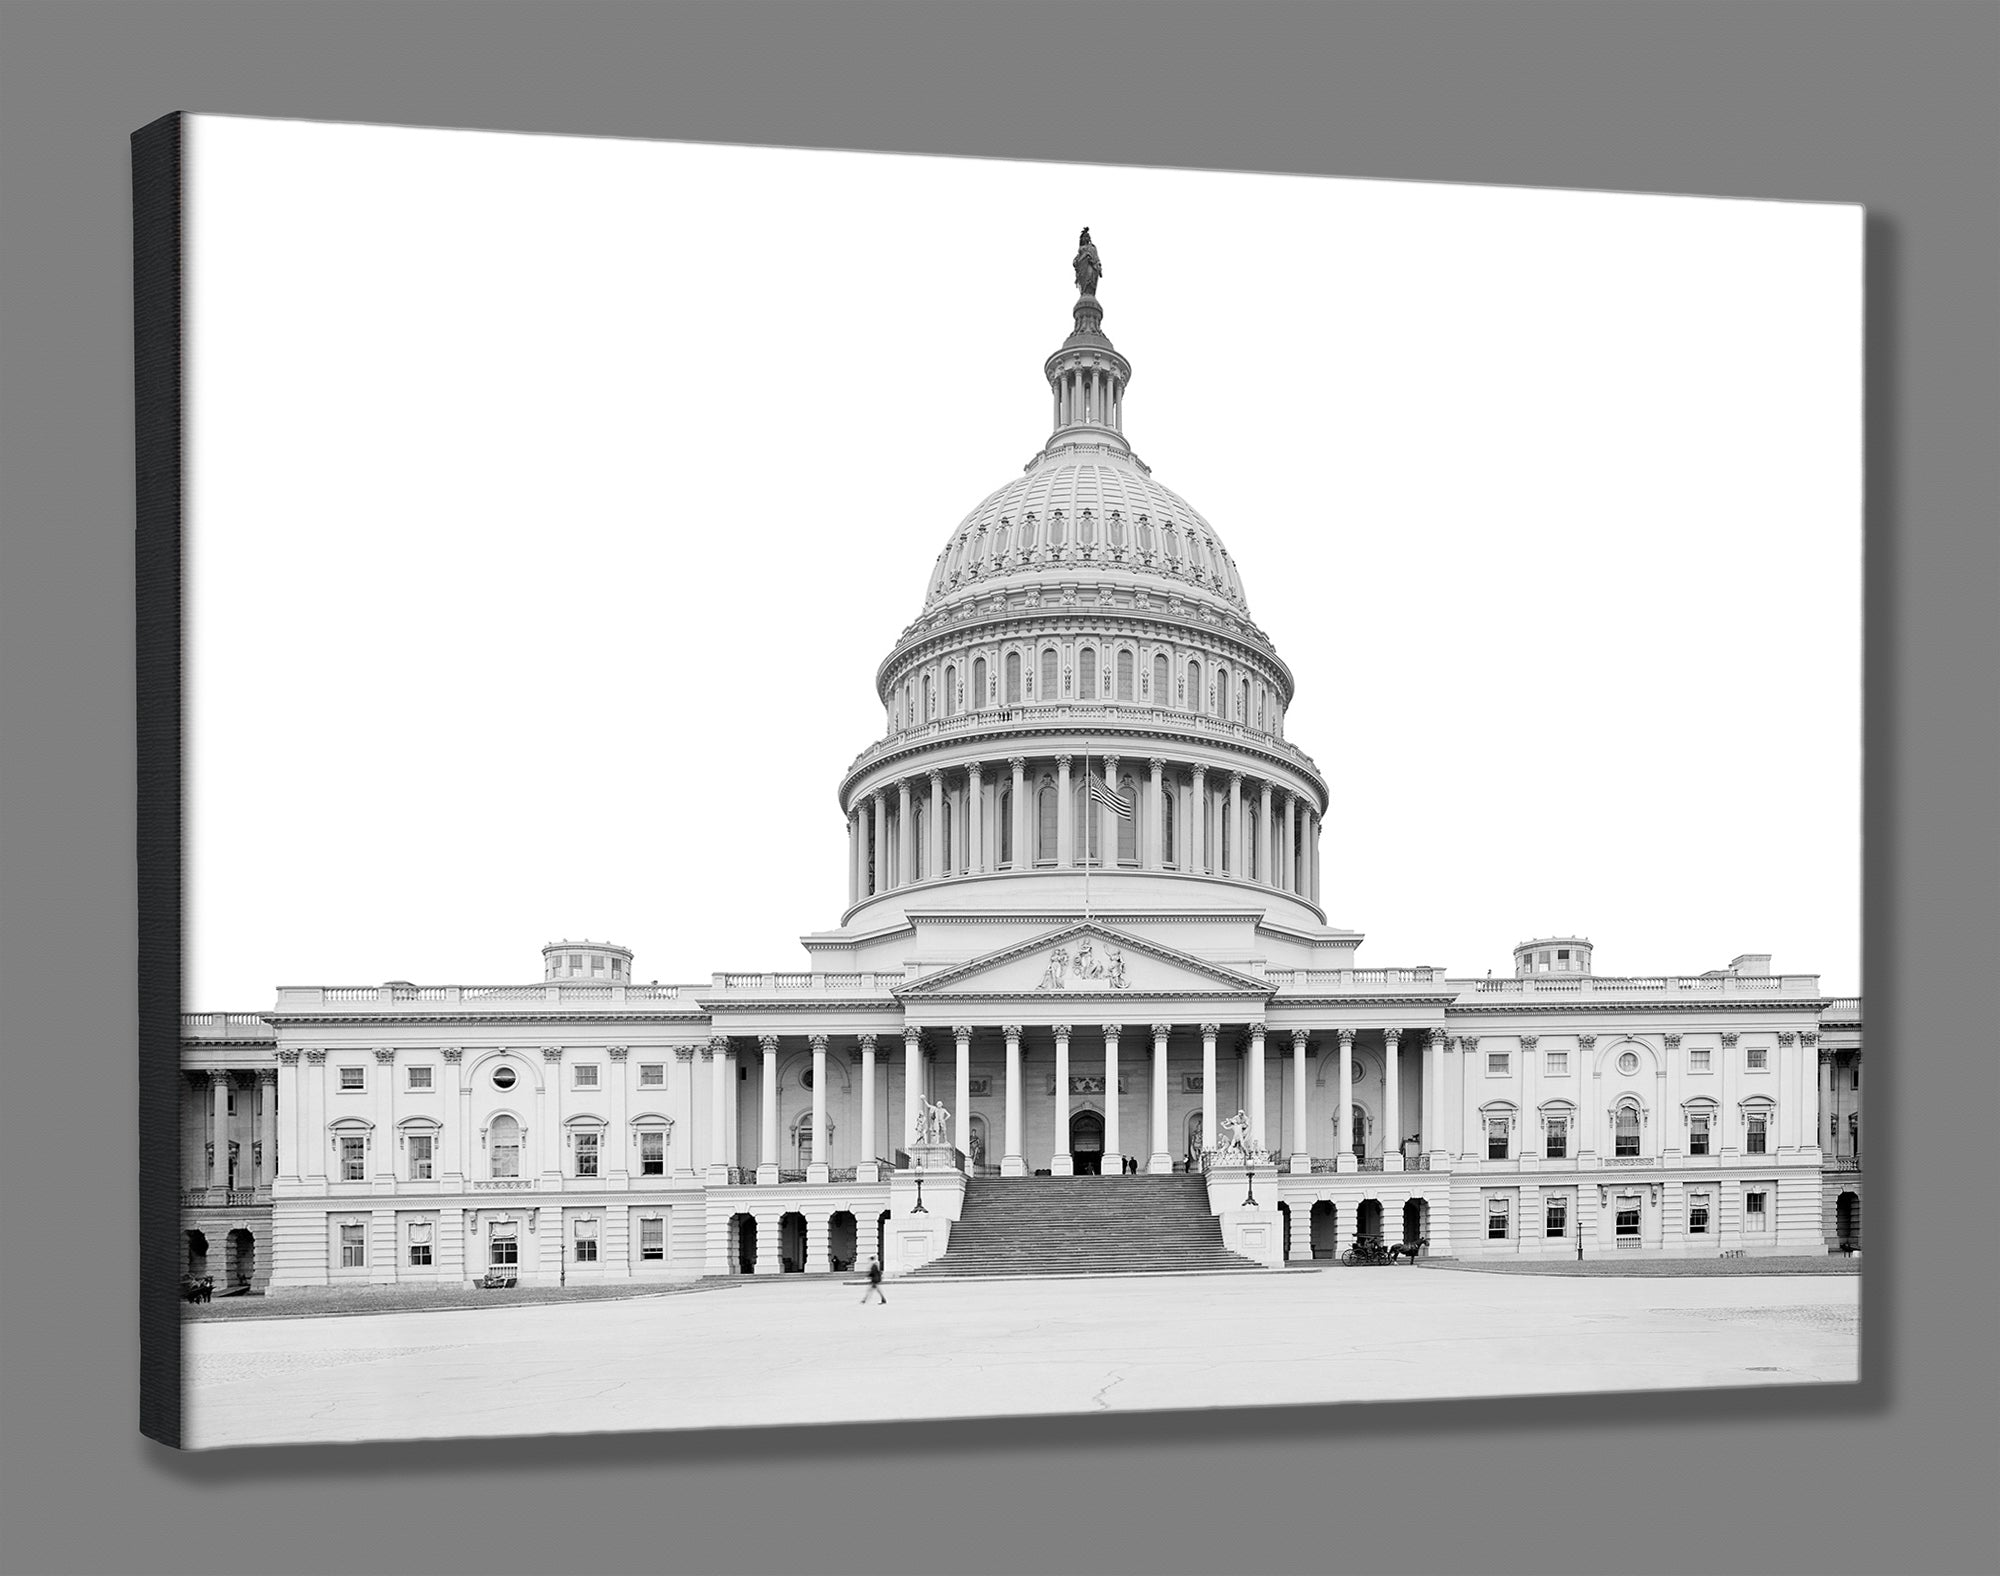 A canvas print reproduction of a vintage image of DC's Capitol Building